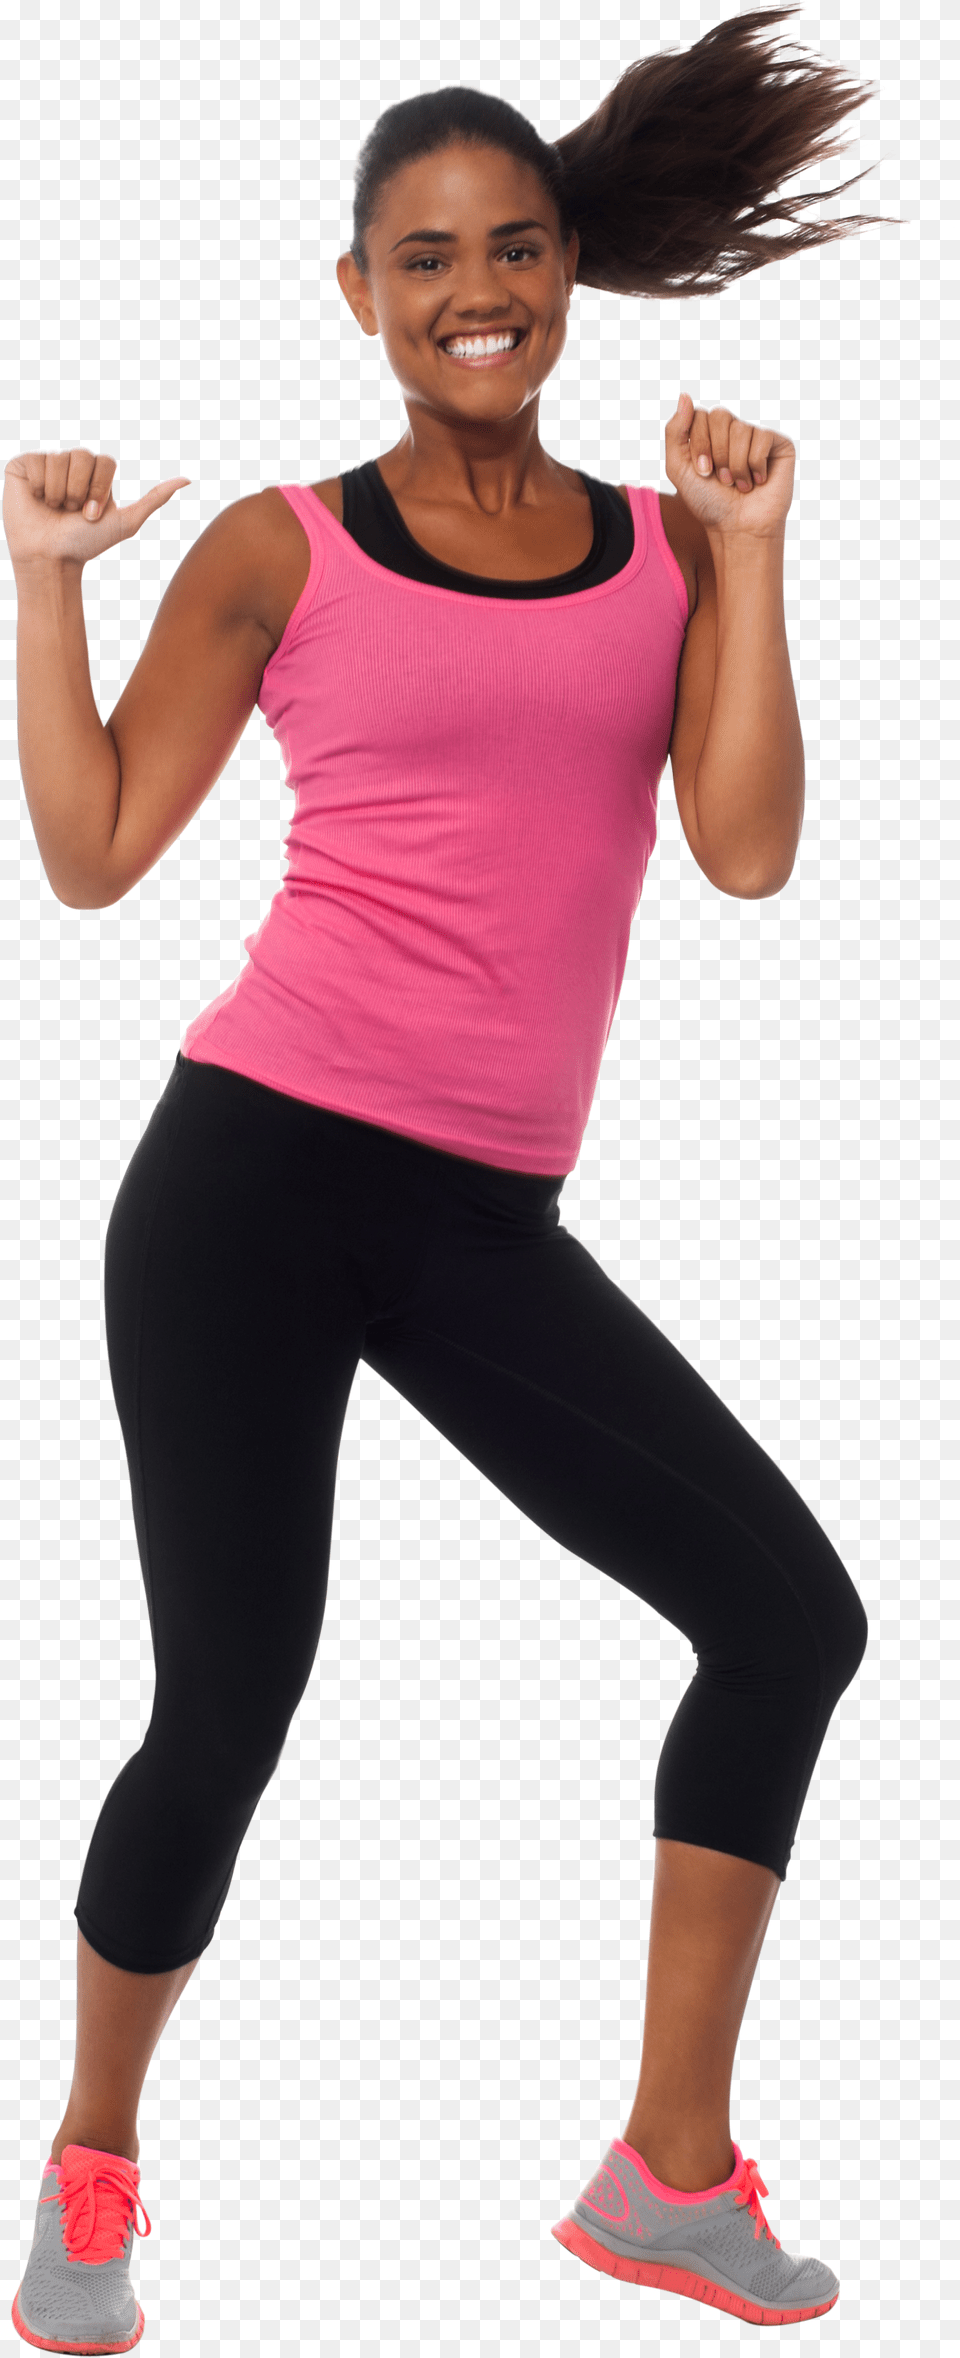 Clip Black And White Stock Girl Image Purepng Free Woman Dancing Transparent Background Png